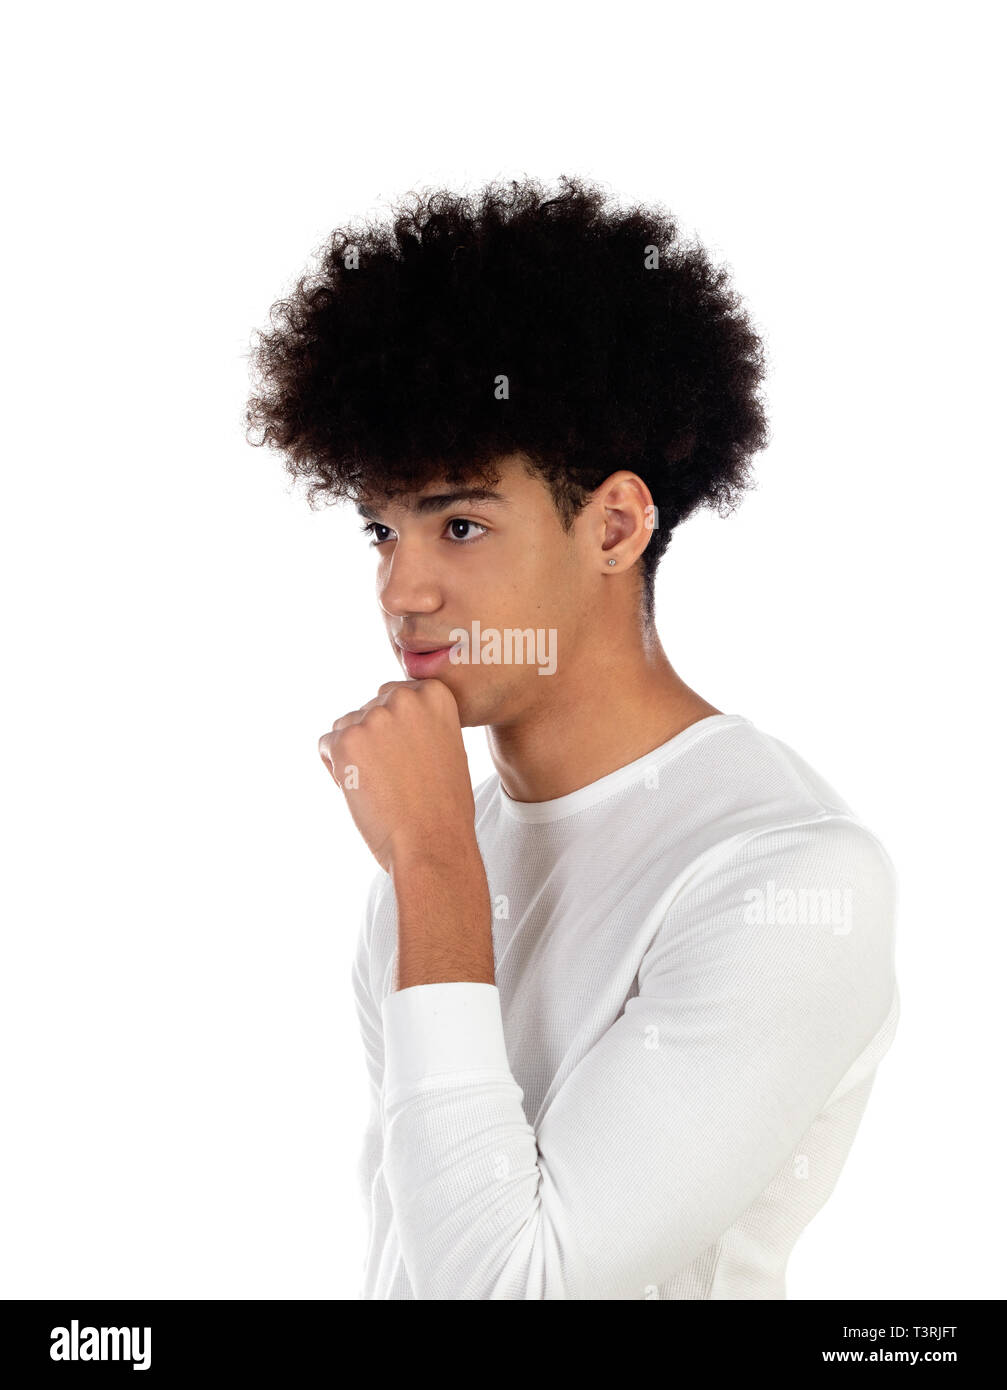 Pensive teenager boy wiht afro hairstyle isolate on a white background  Stock Photo - Alamy